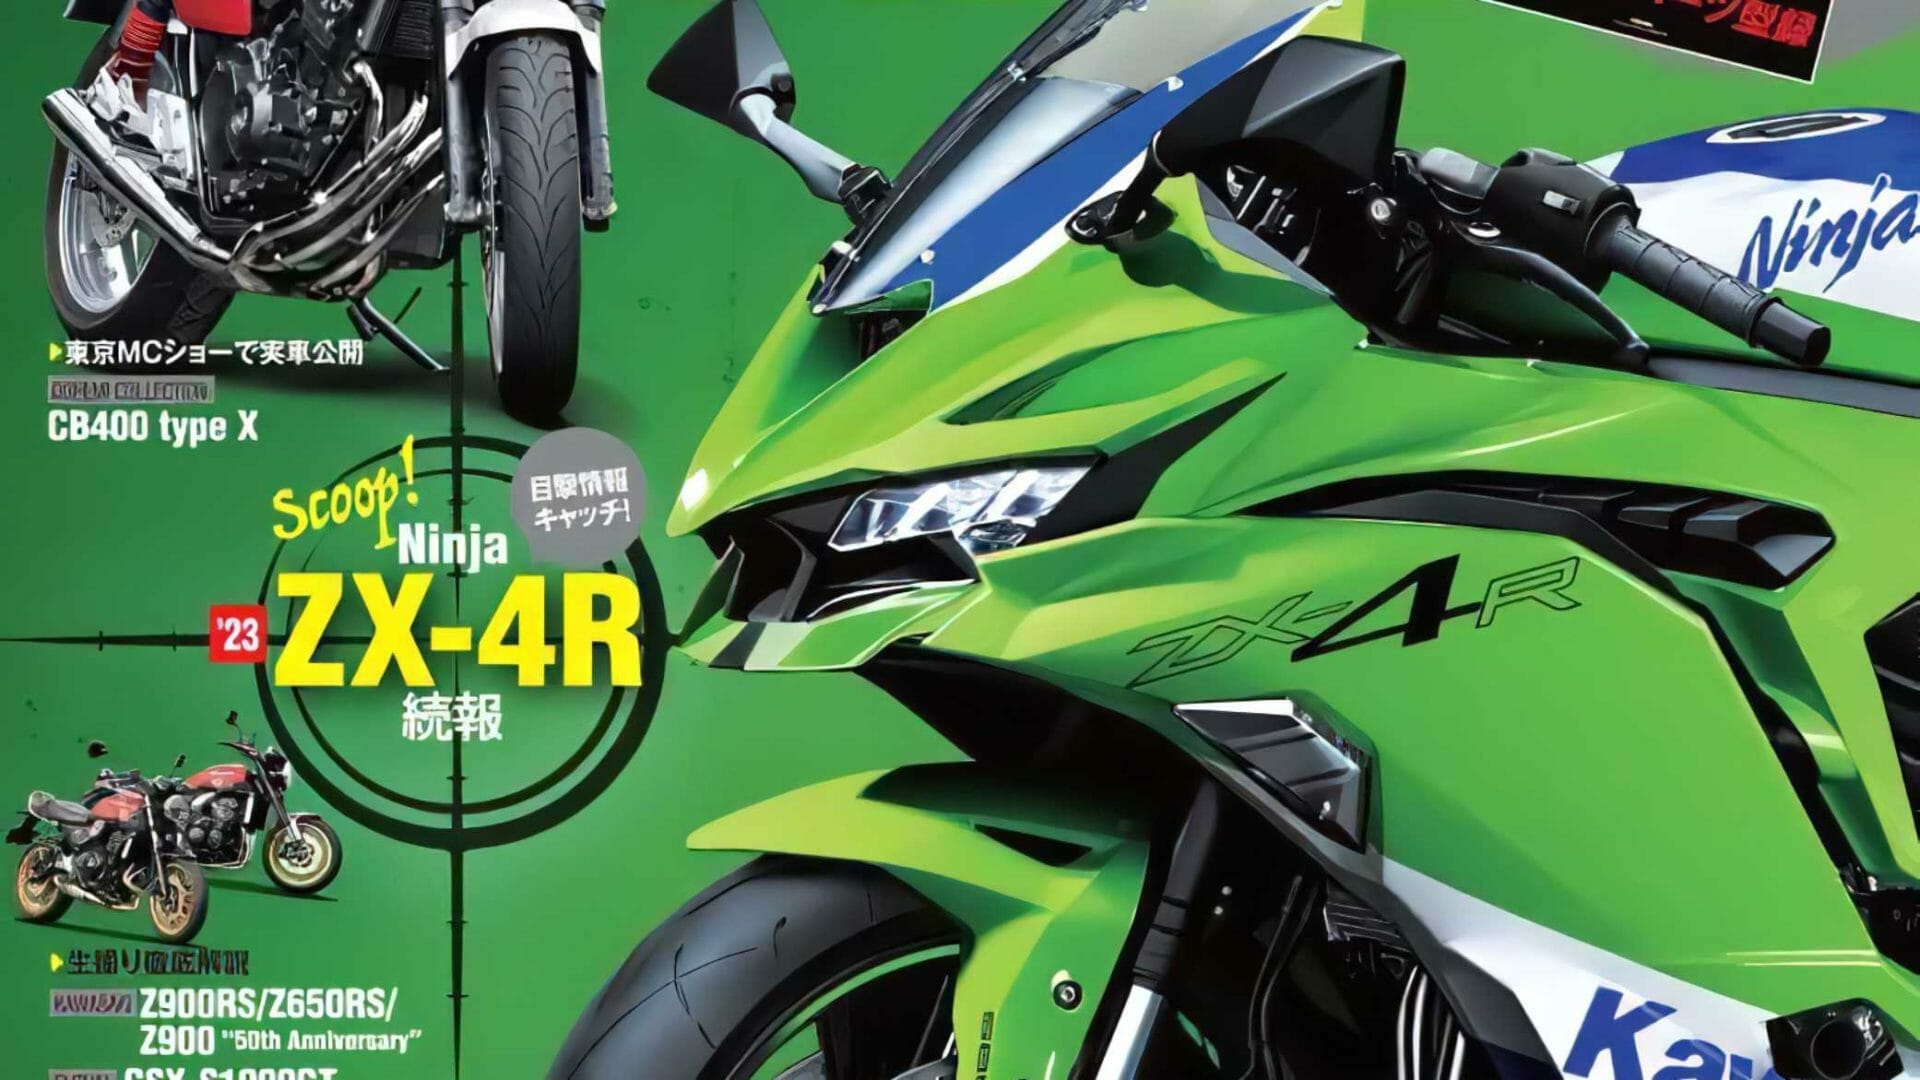 Kawasaki ZX-4R - what can we expect?
- also in the MOTORCYCLES.NEWS APP